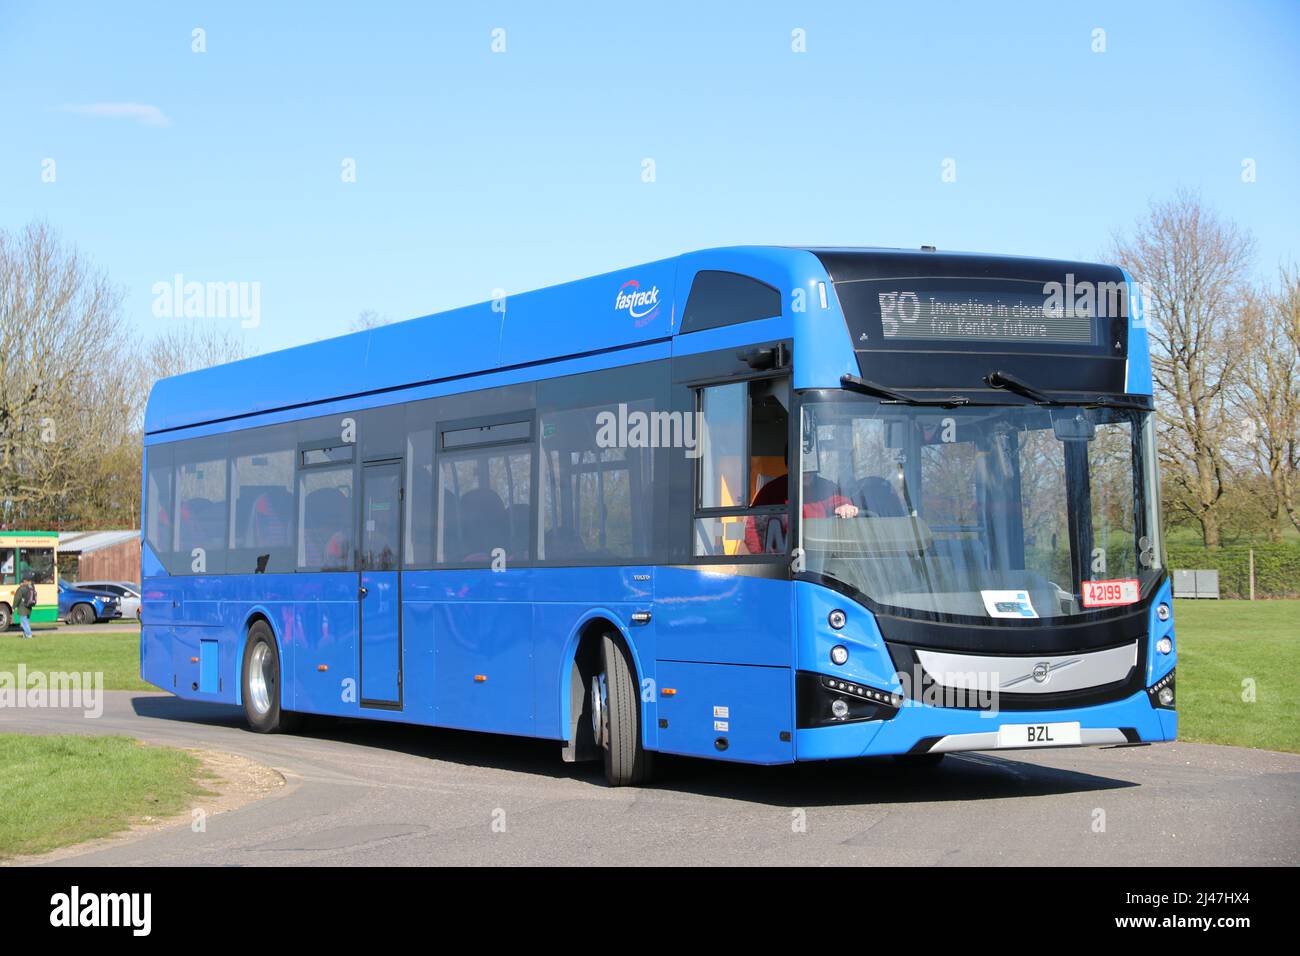 VOLVO BZL ELECTRIC DEMONSTRATOR RIGHT HAND DRIVE SINGLE DECK BUS IN UK Stock Photo